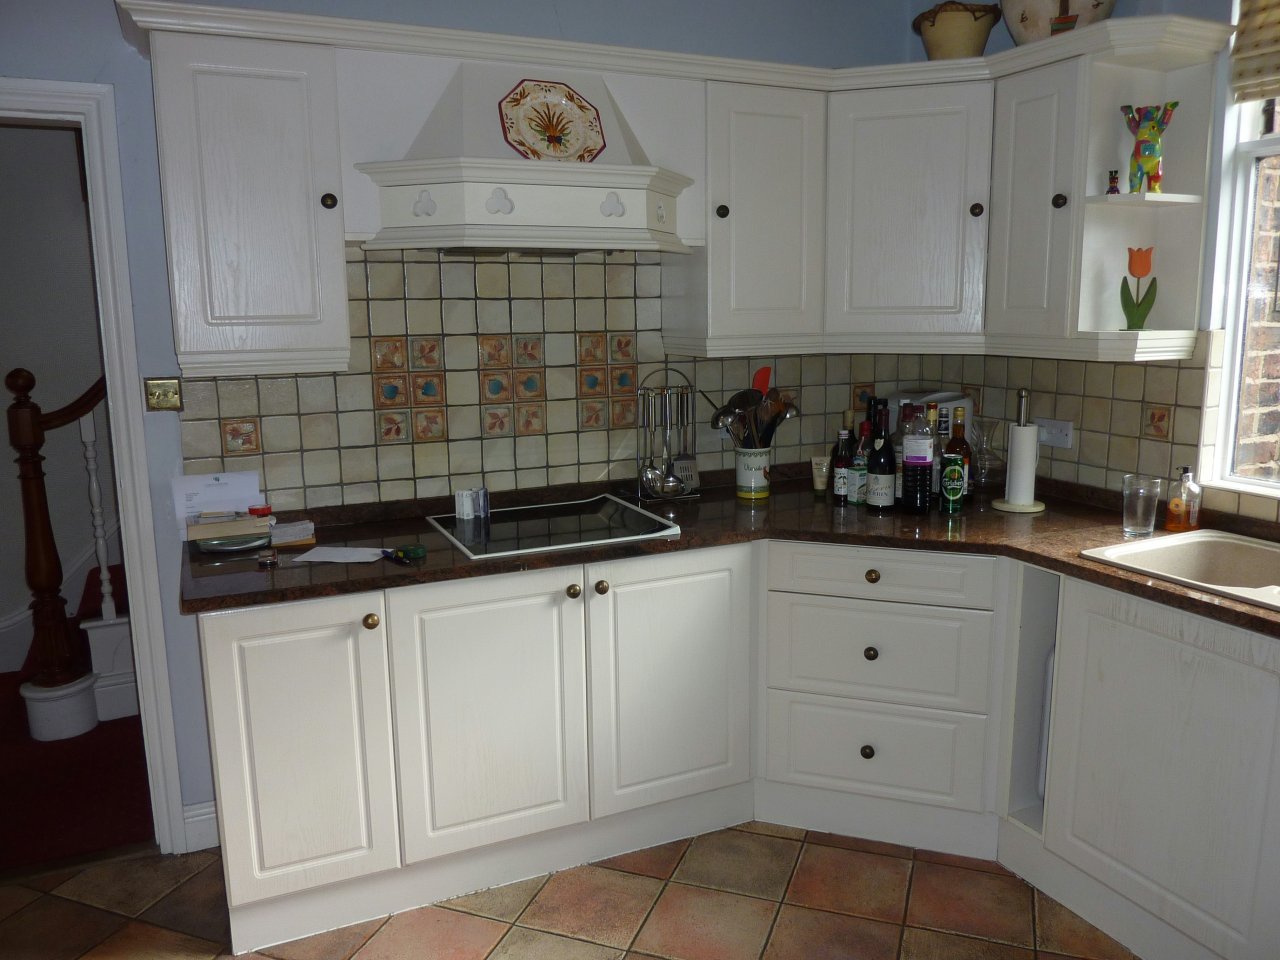 JPEG image - The kitchen as it was before the latest renovation ...